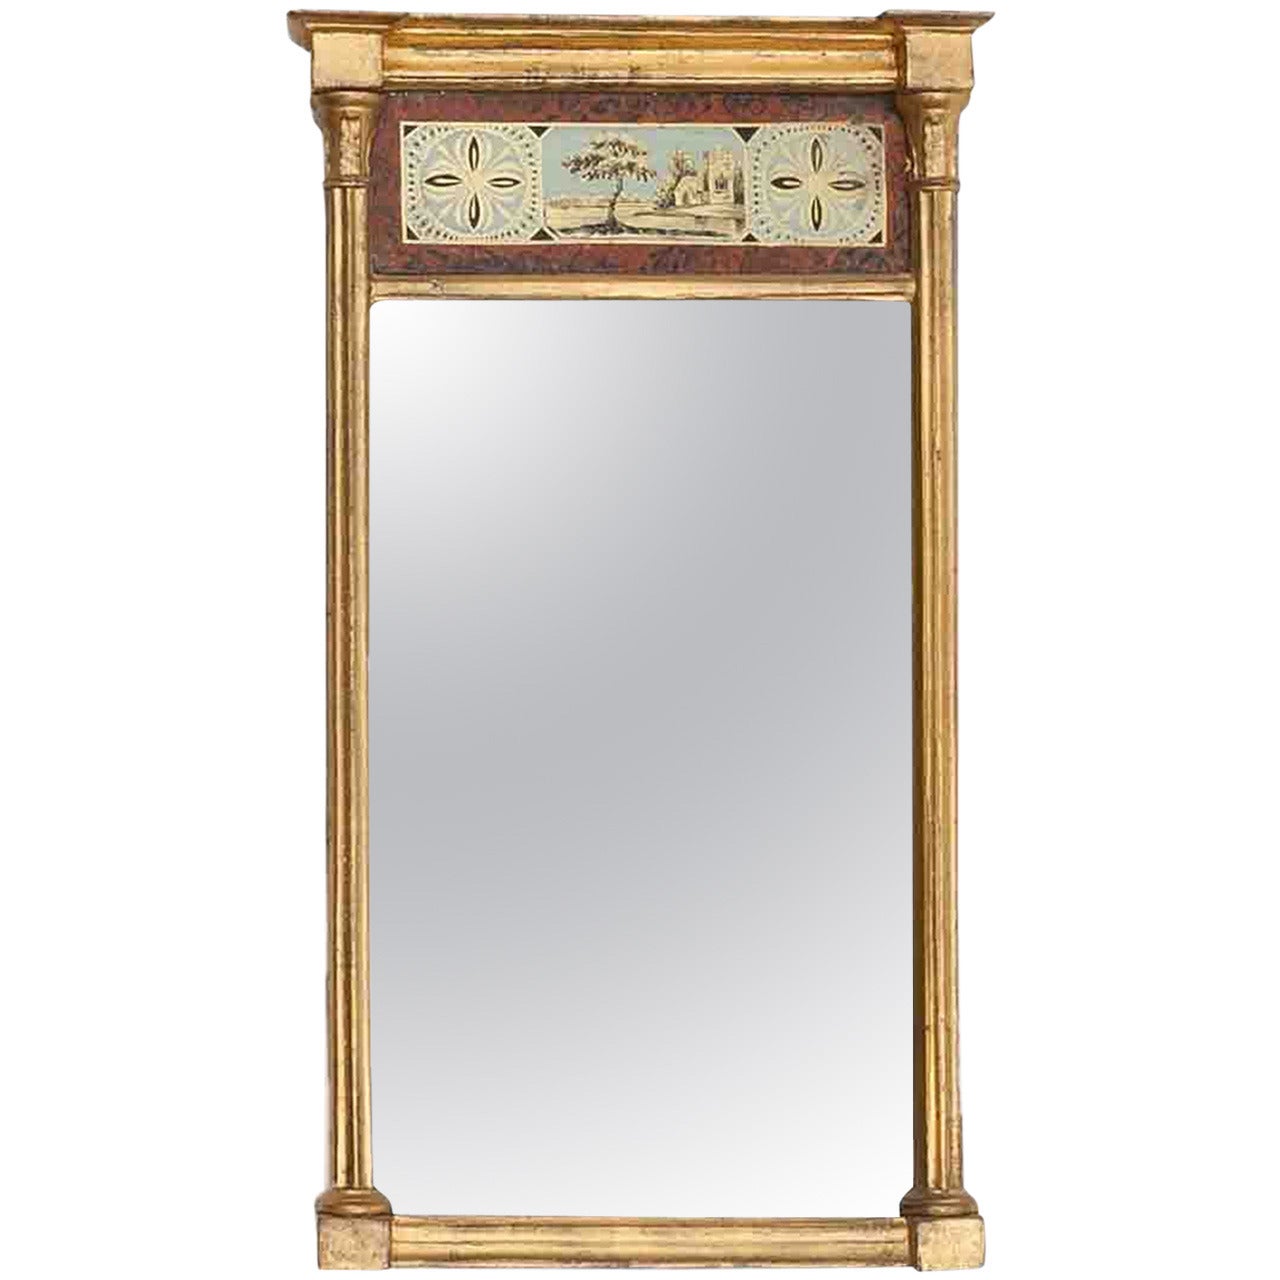 Early 19th Century American Verre Eglomise Wall Mirror For Sale